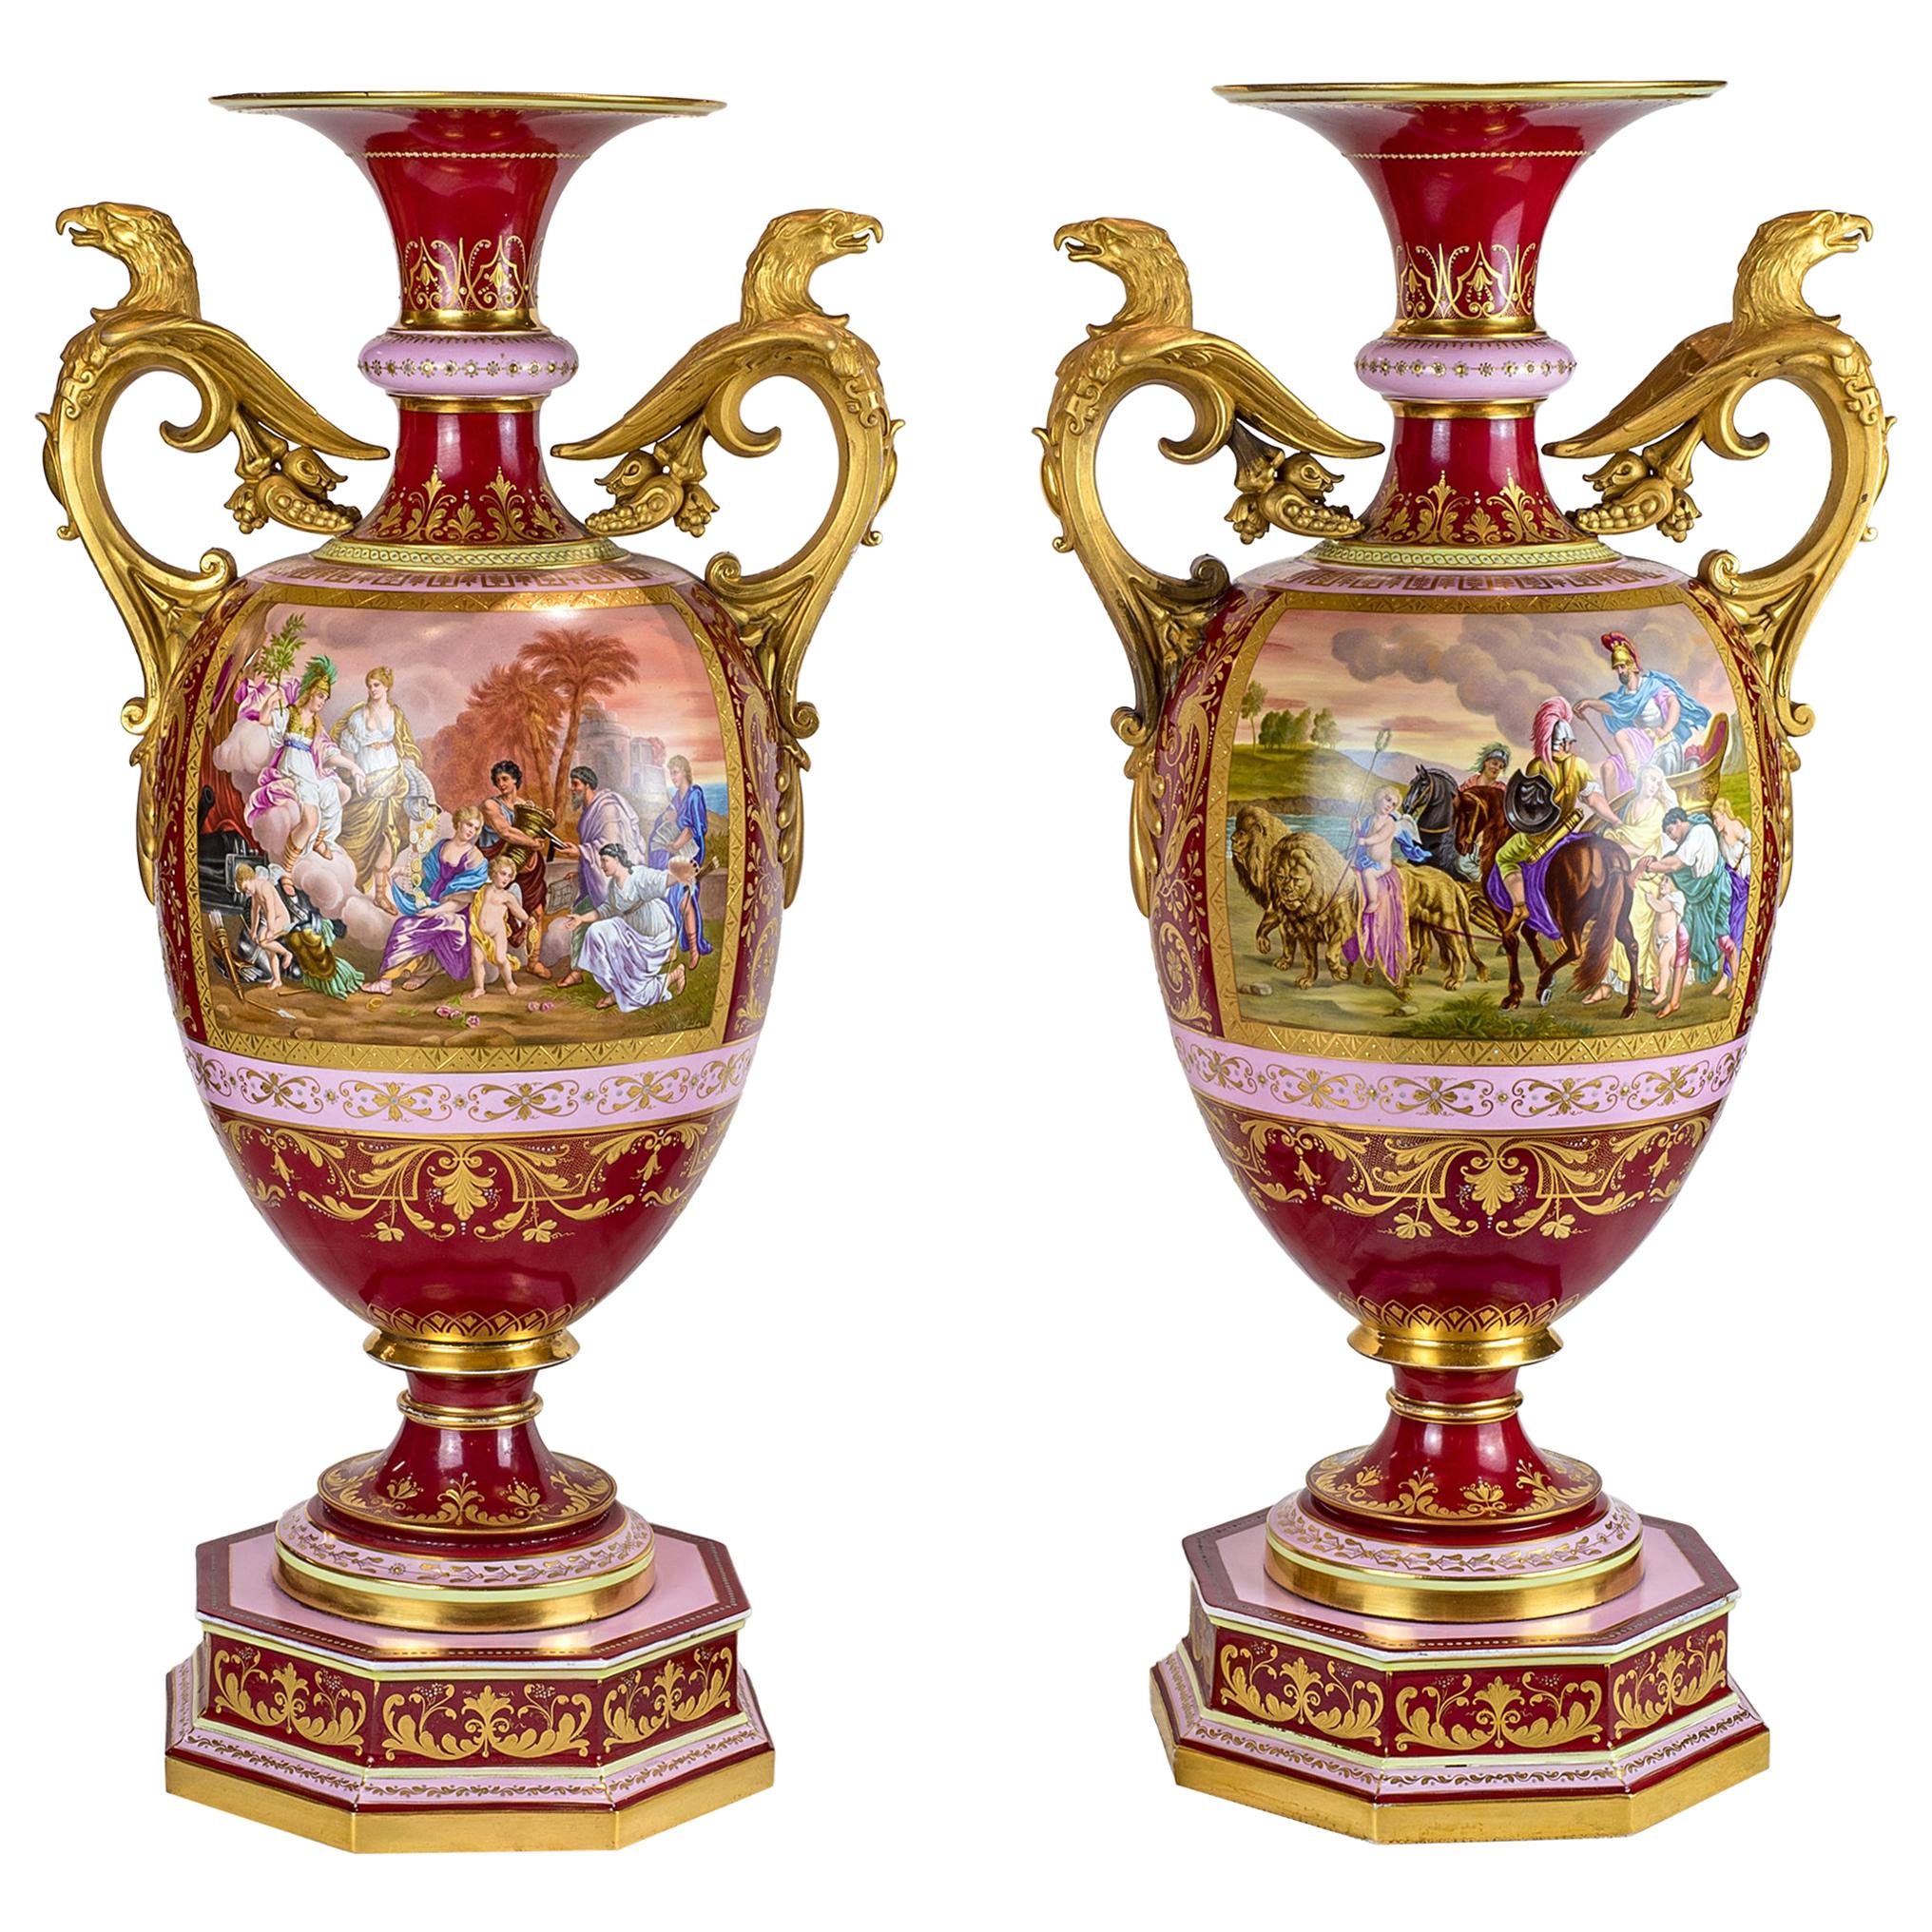 Magnificent Pair of Royal Vienna-Style Gilt Bronze Mounted Porcelain Urns For Sale